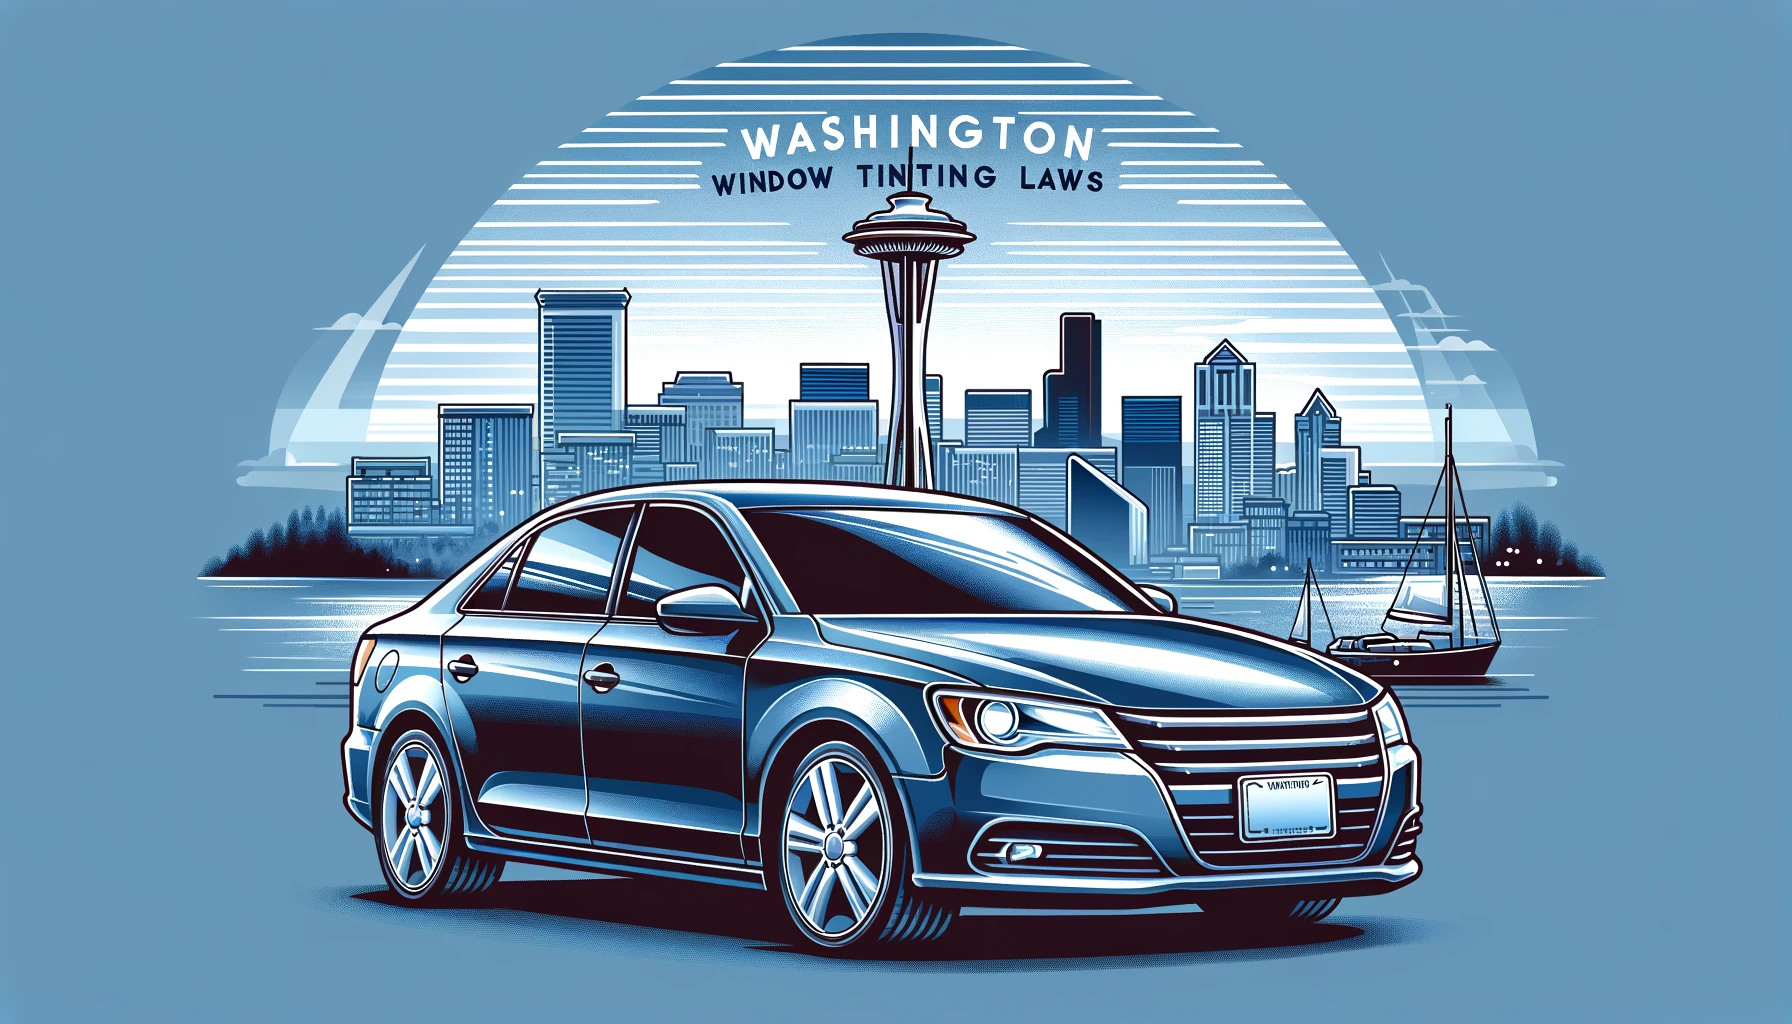 Illustration of a car with tinted windows against Seattle skyline at dusk